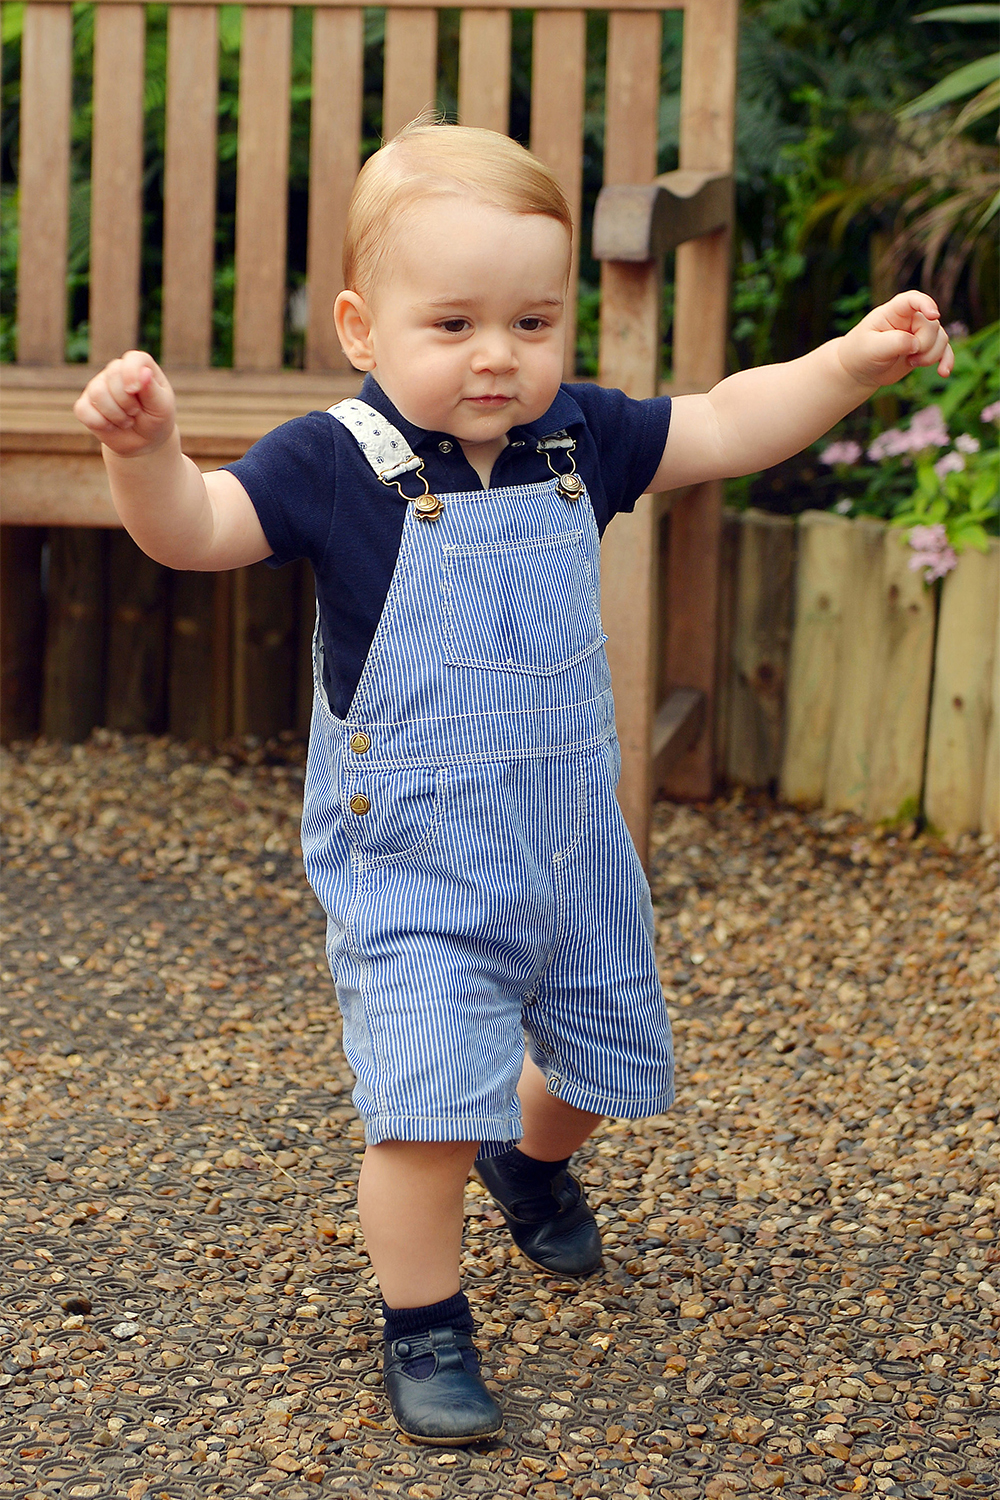 To celebrate HRH Prince George's first birthday, the Duke and Duchess released images of George during a visit to Sensational Butterflies exhibition at the Natural History Museum on July 02, 2014 in London, England.